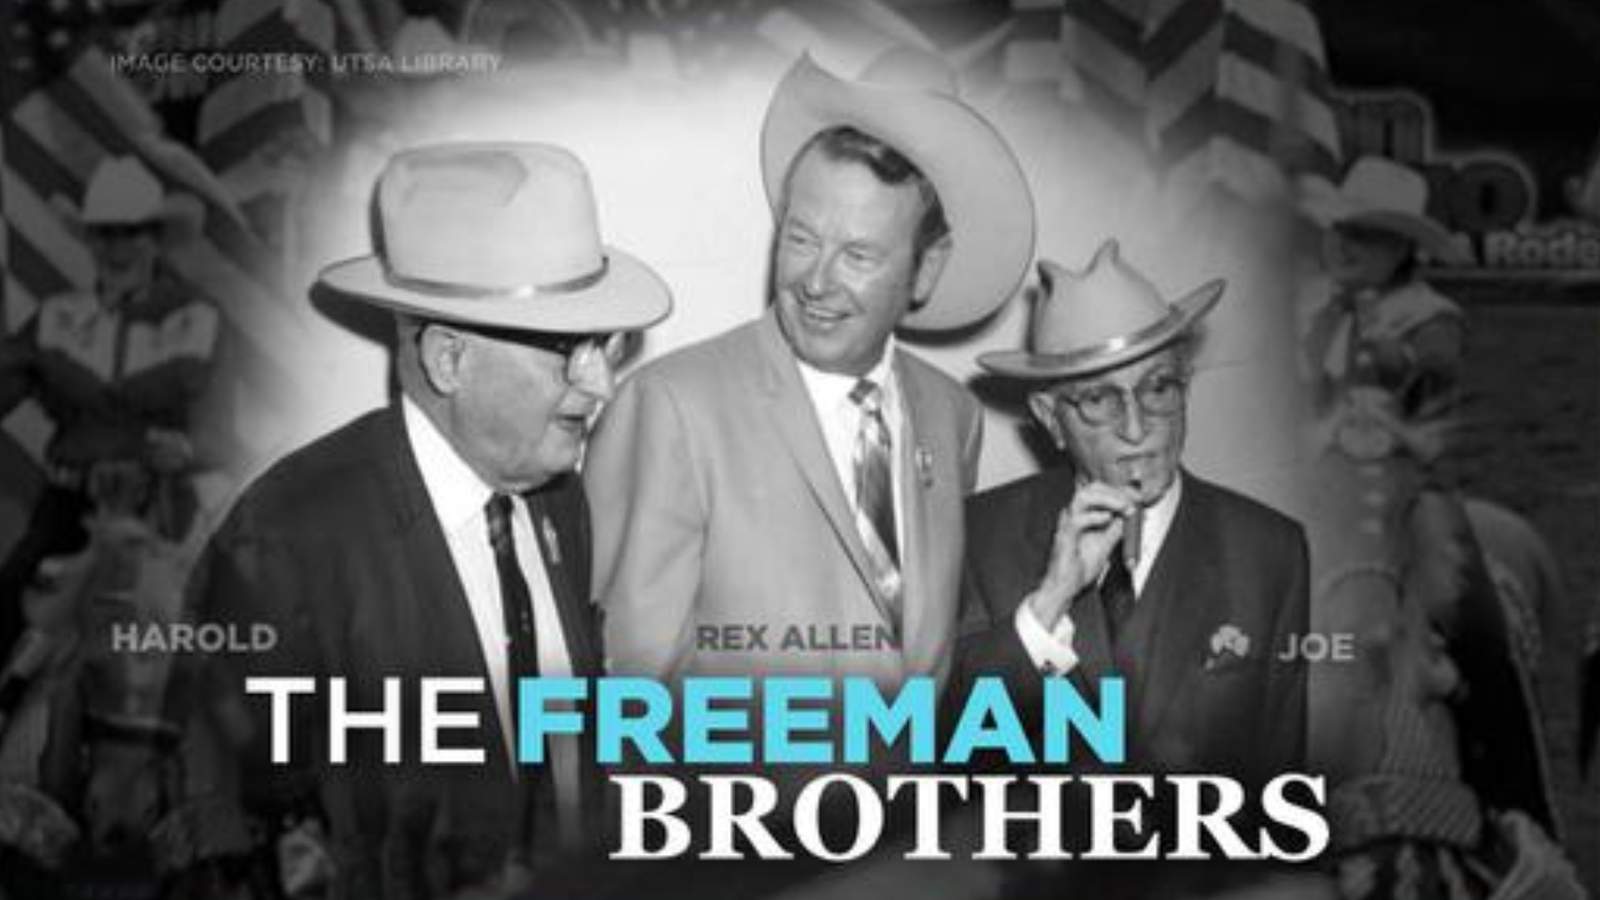 Rodeo Remembers: The Freeman Brothers